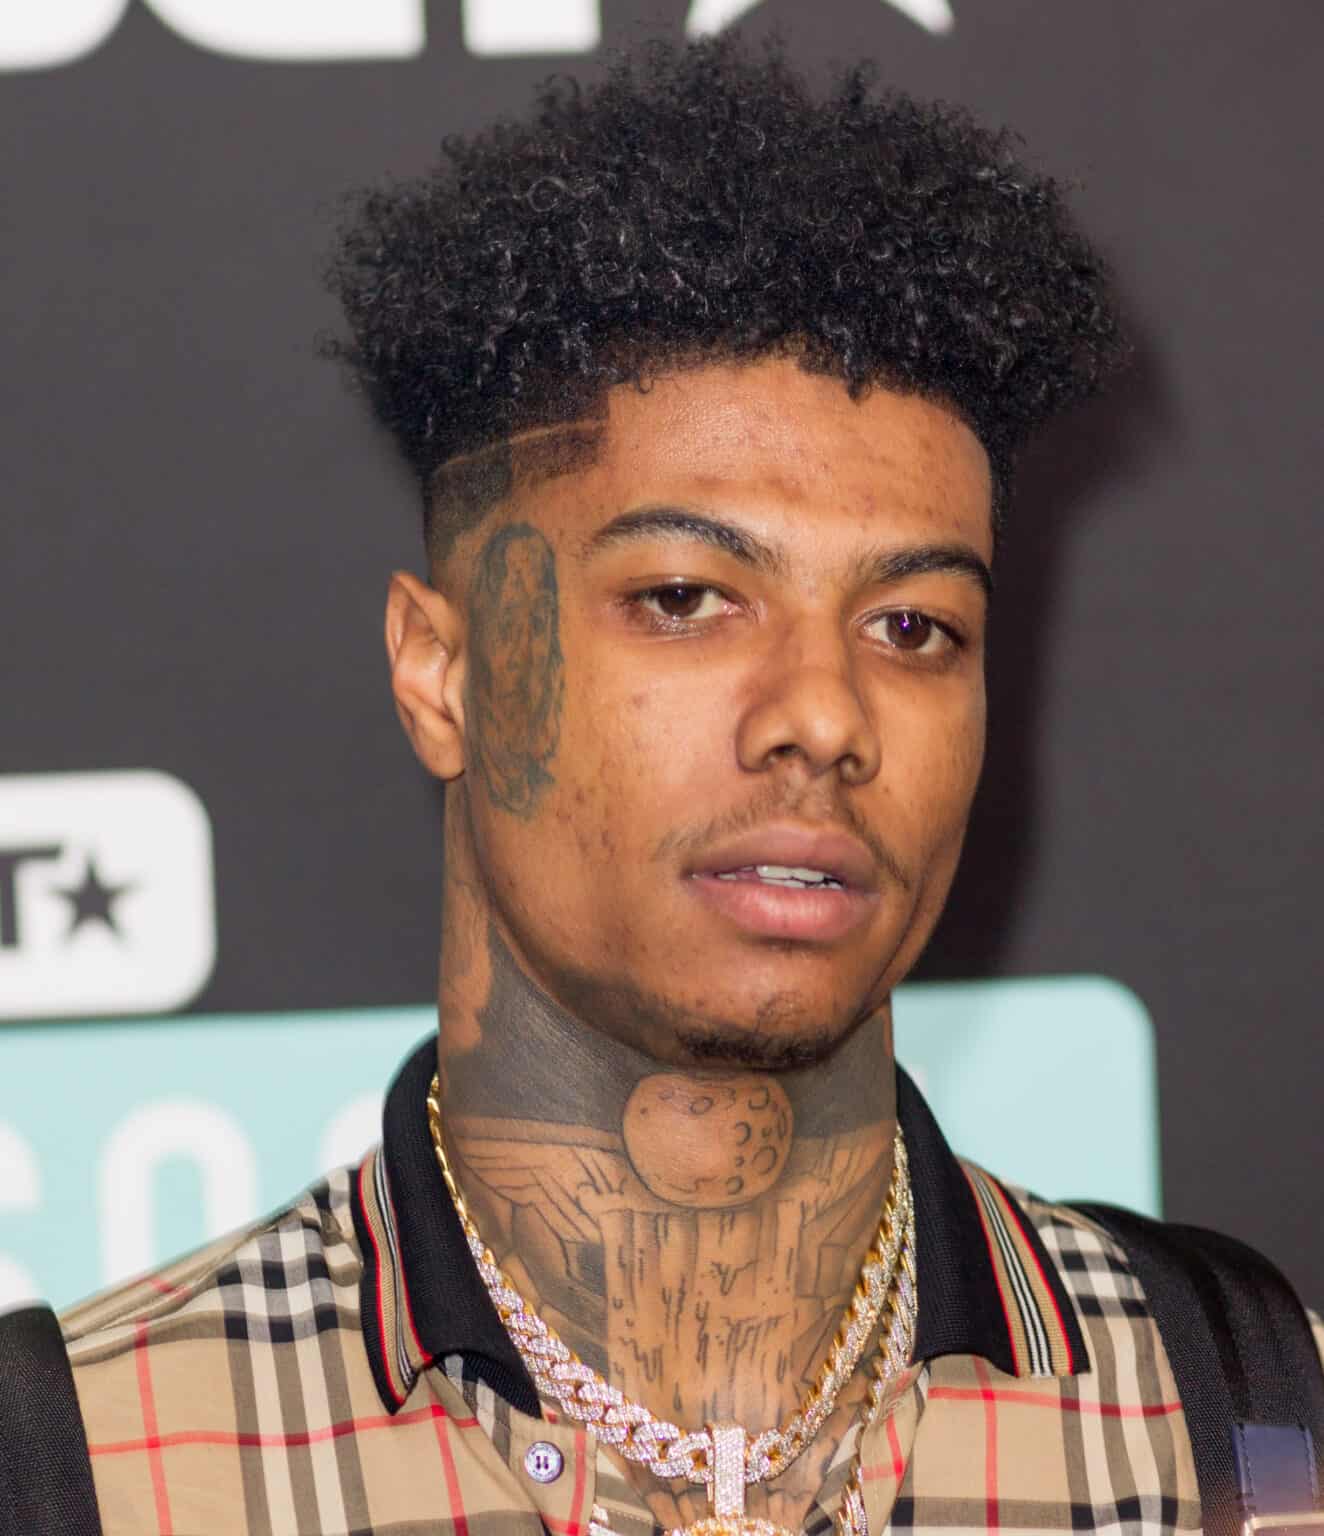 What Was Blueface's First Song?